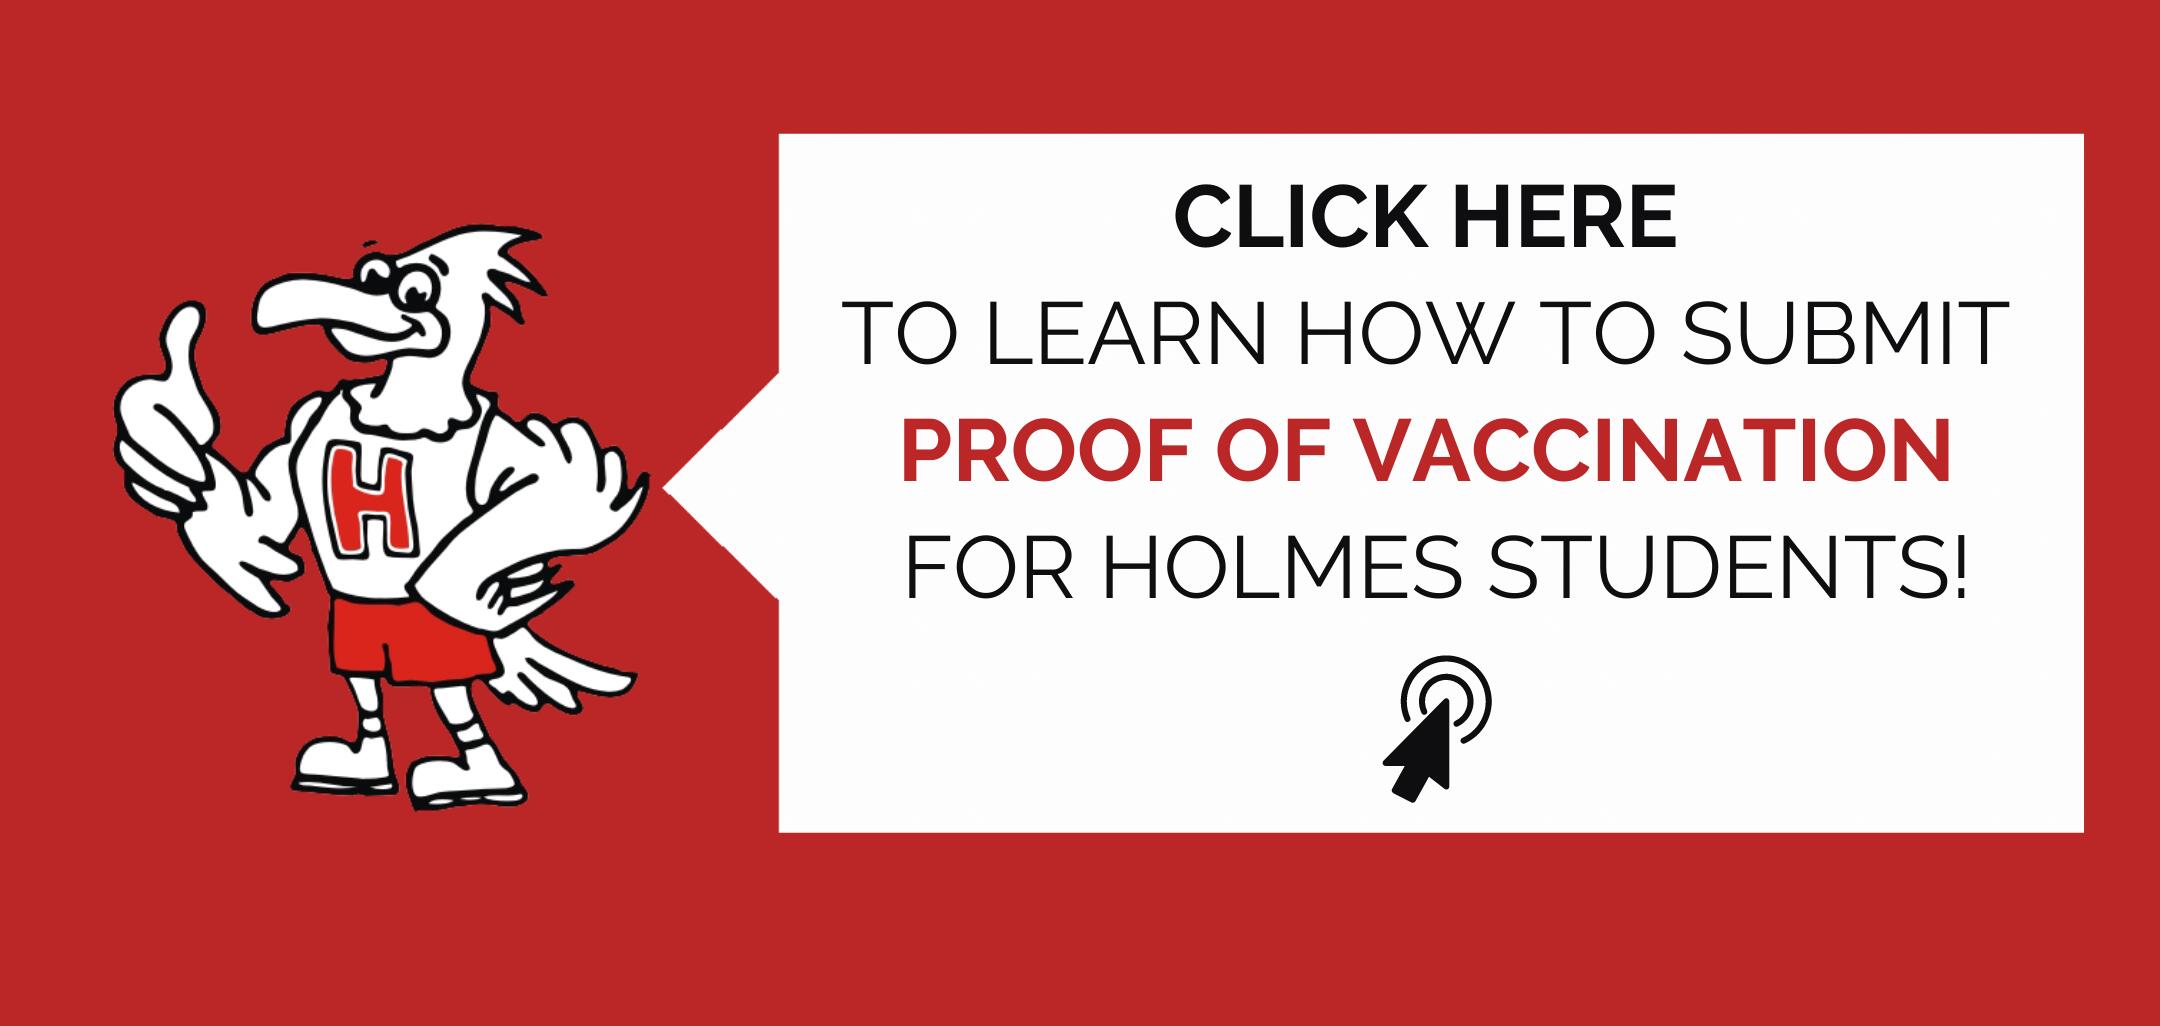 Click here to learn how to provide proof of vaccination for Holmes students